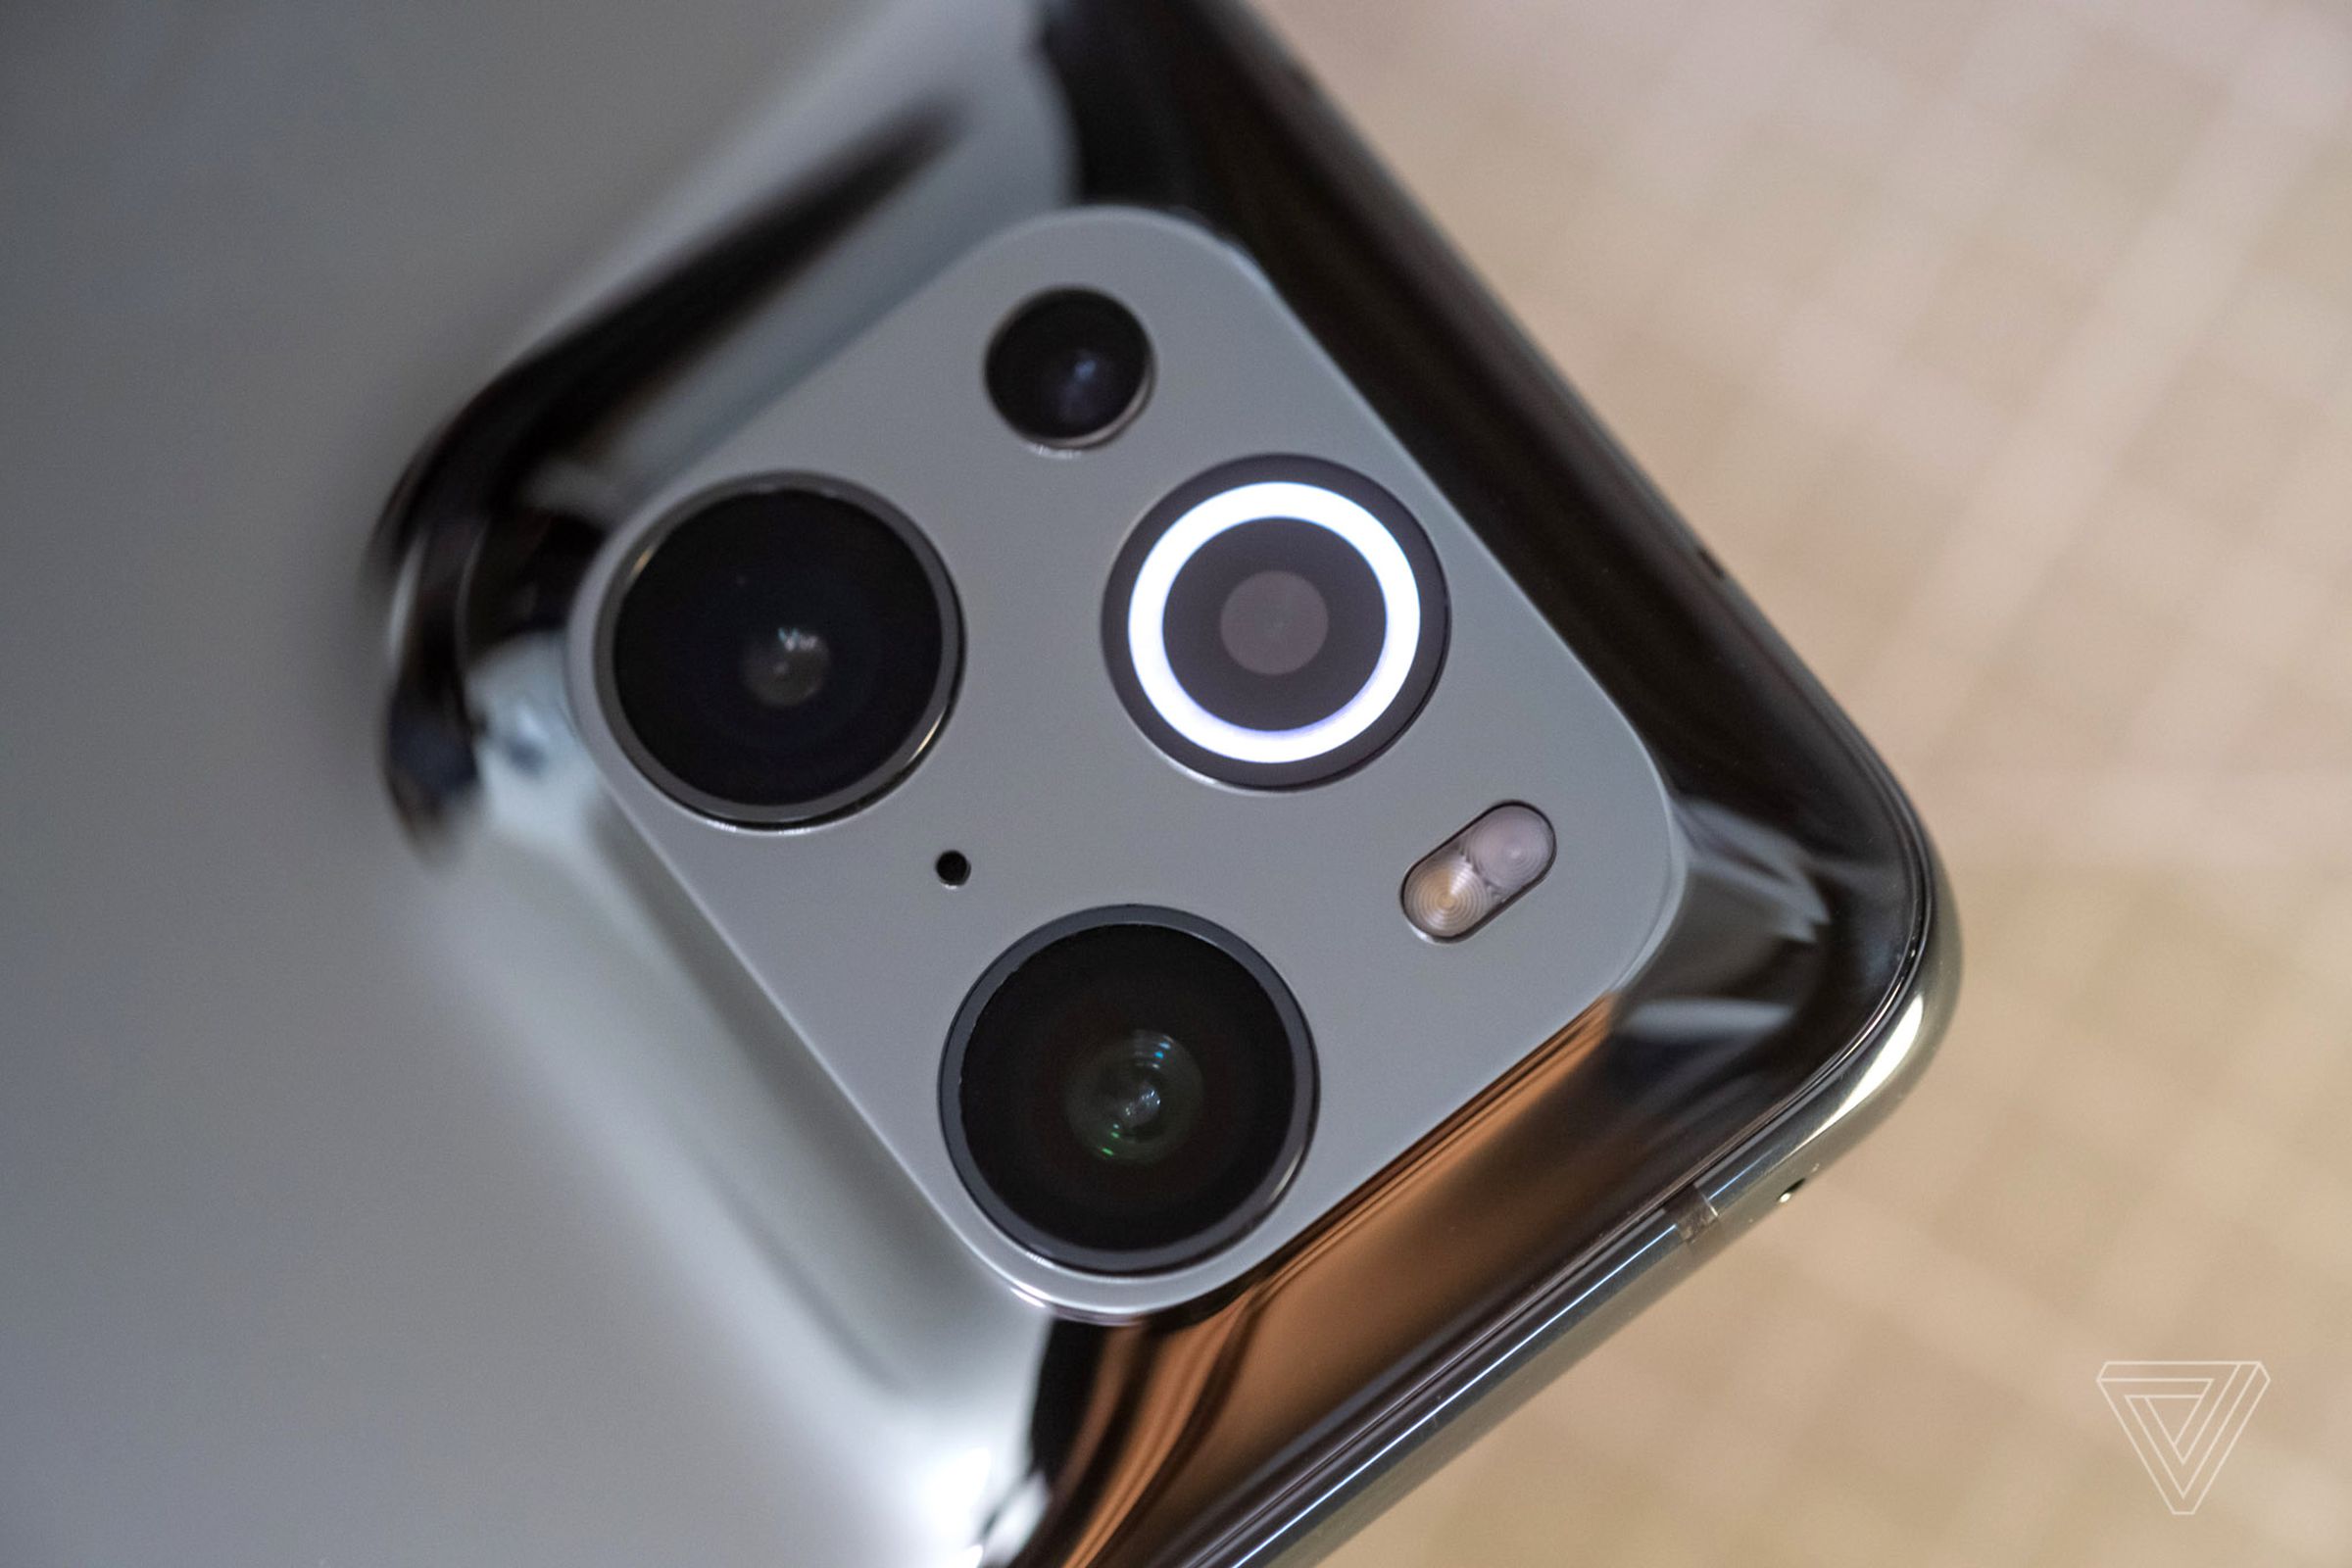 The Find X3 Pro has a microscope camera with a built-in ring light.